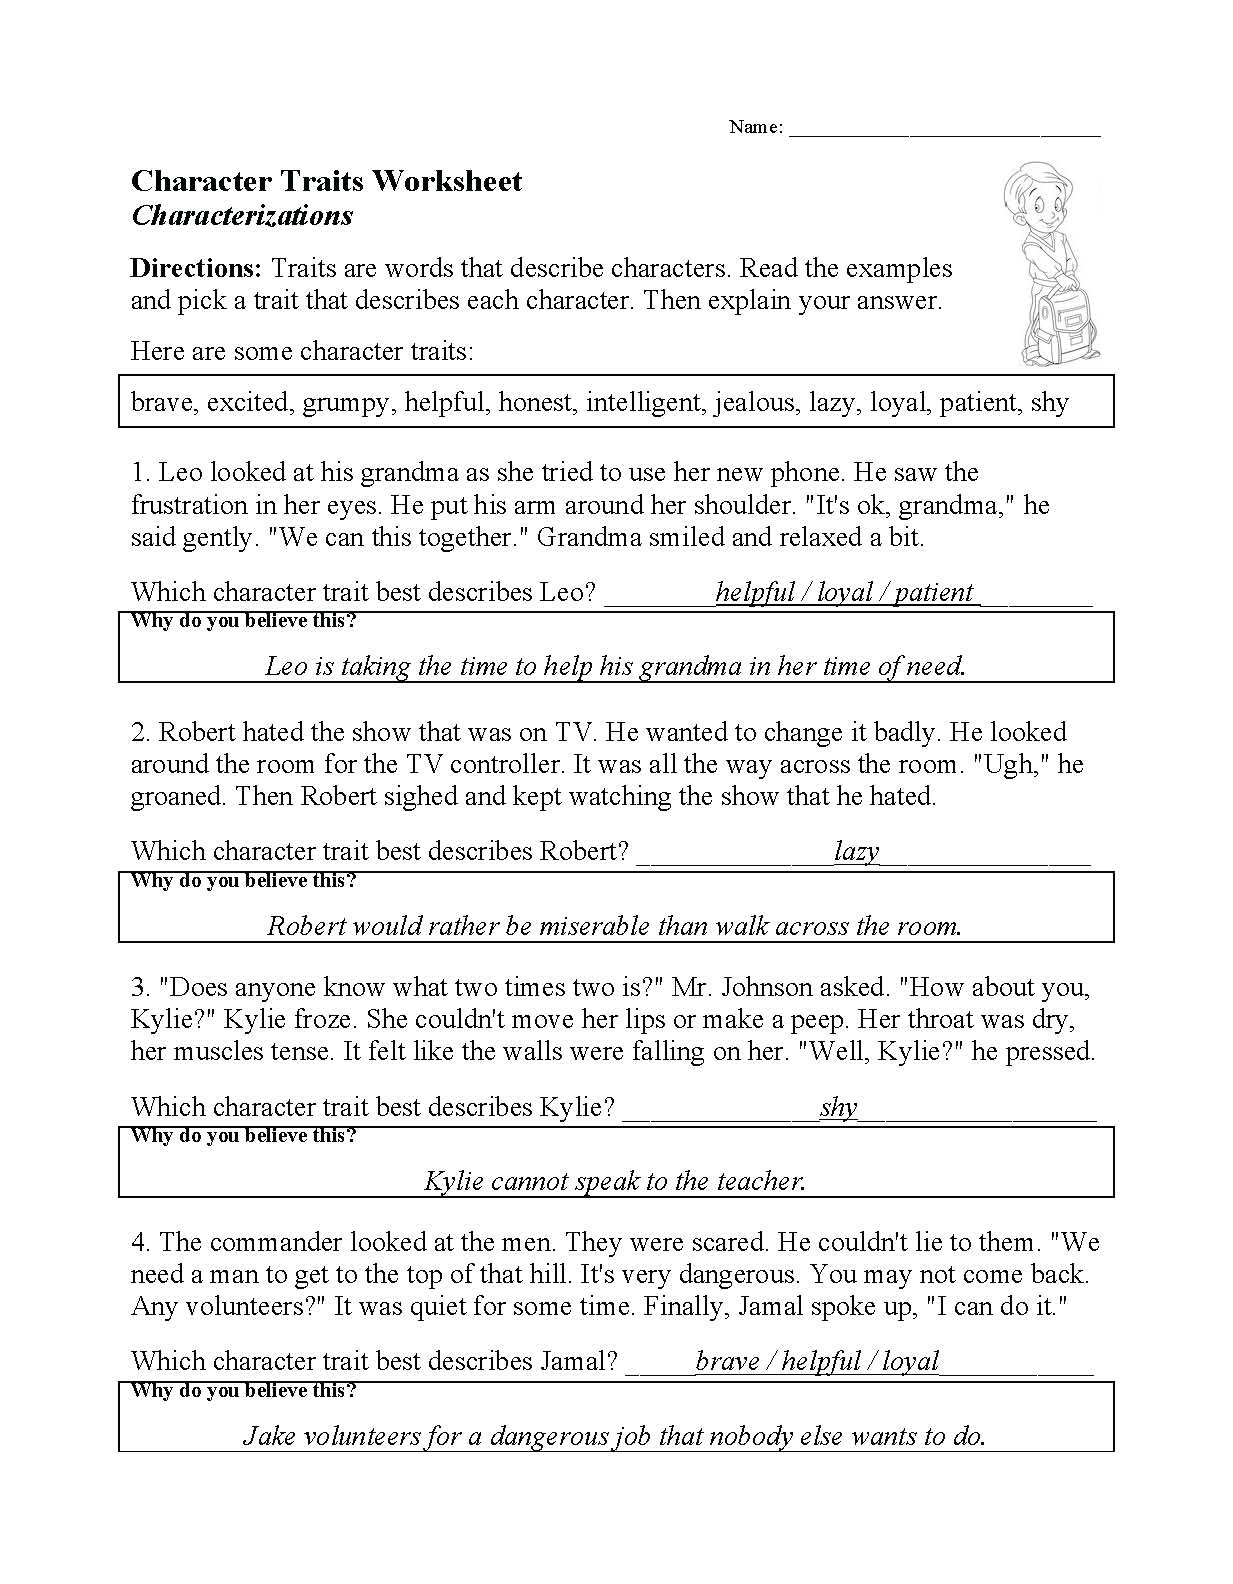 This is a preview image of our Character Traits Worksheet. Click on it to enlarge this image and view the source file.